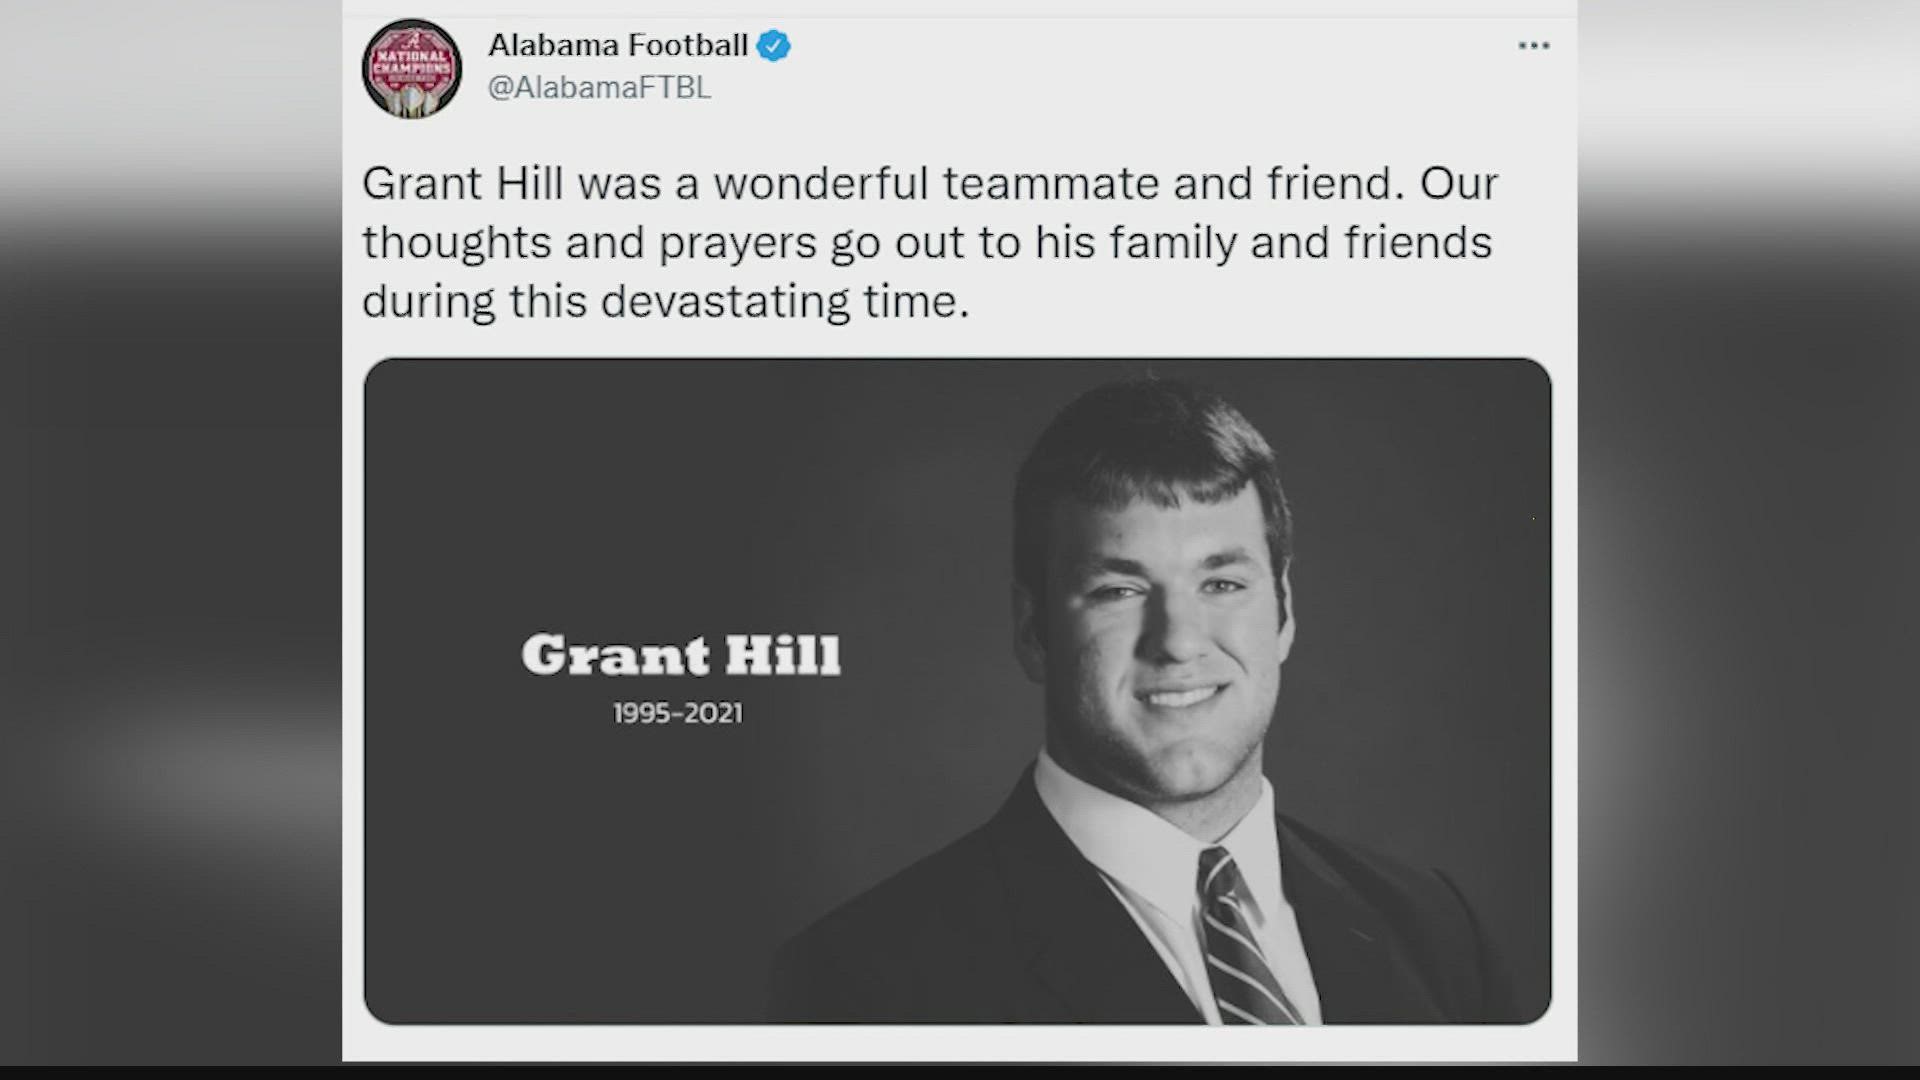 "Grant Hill was a wonderful teammate and friend. Our thoughts and prayers go out to his family and friends during this devastating time," the university said.